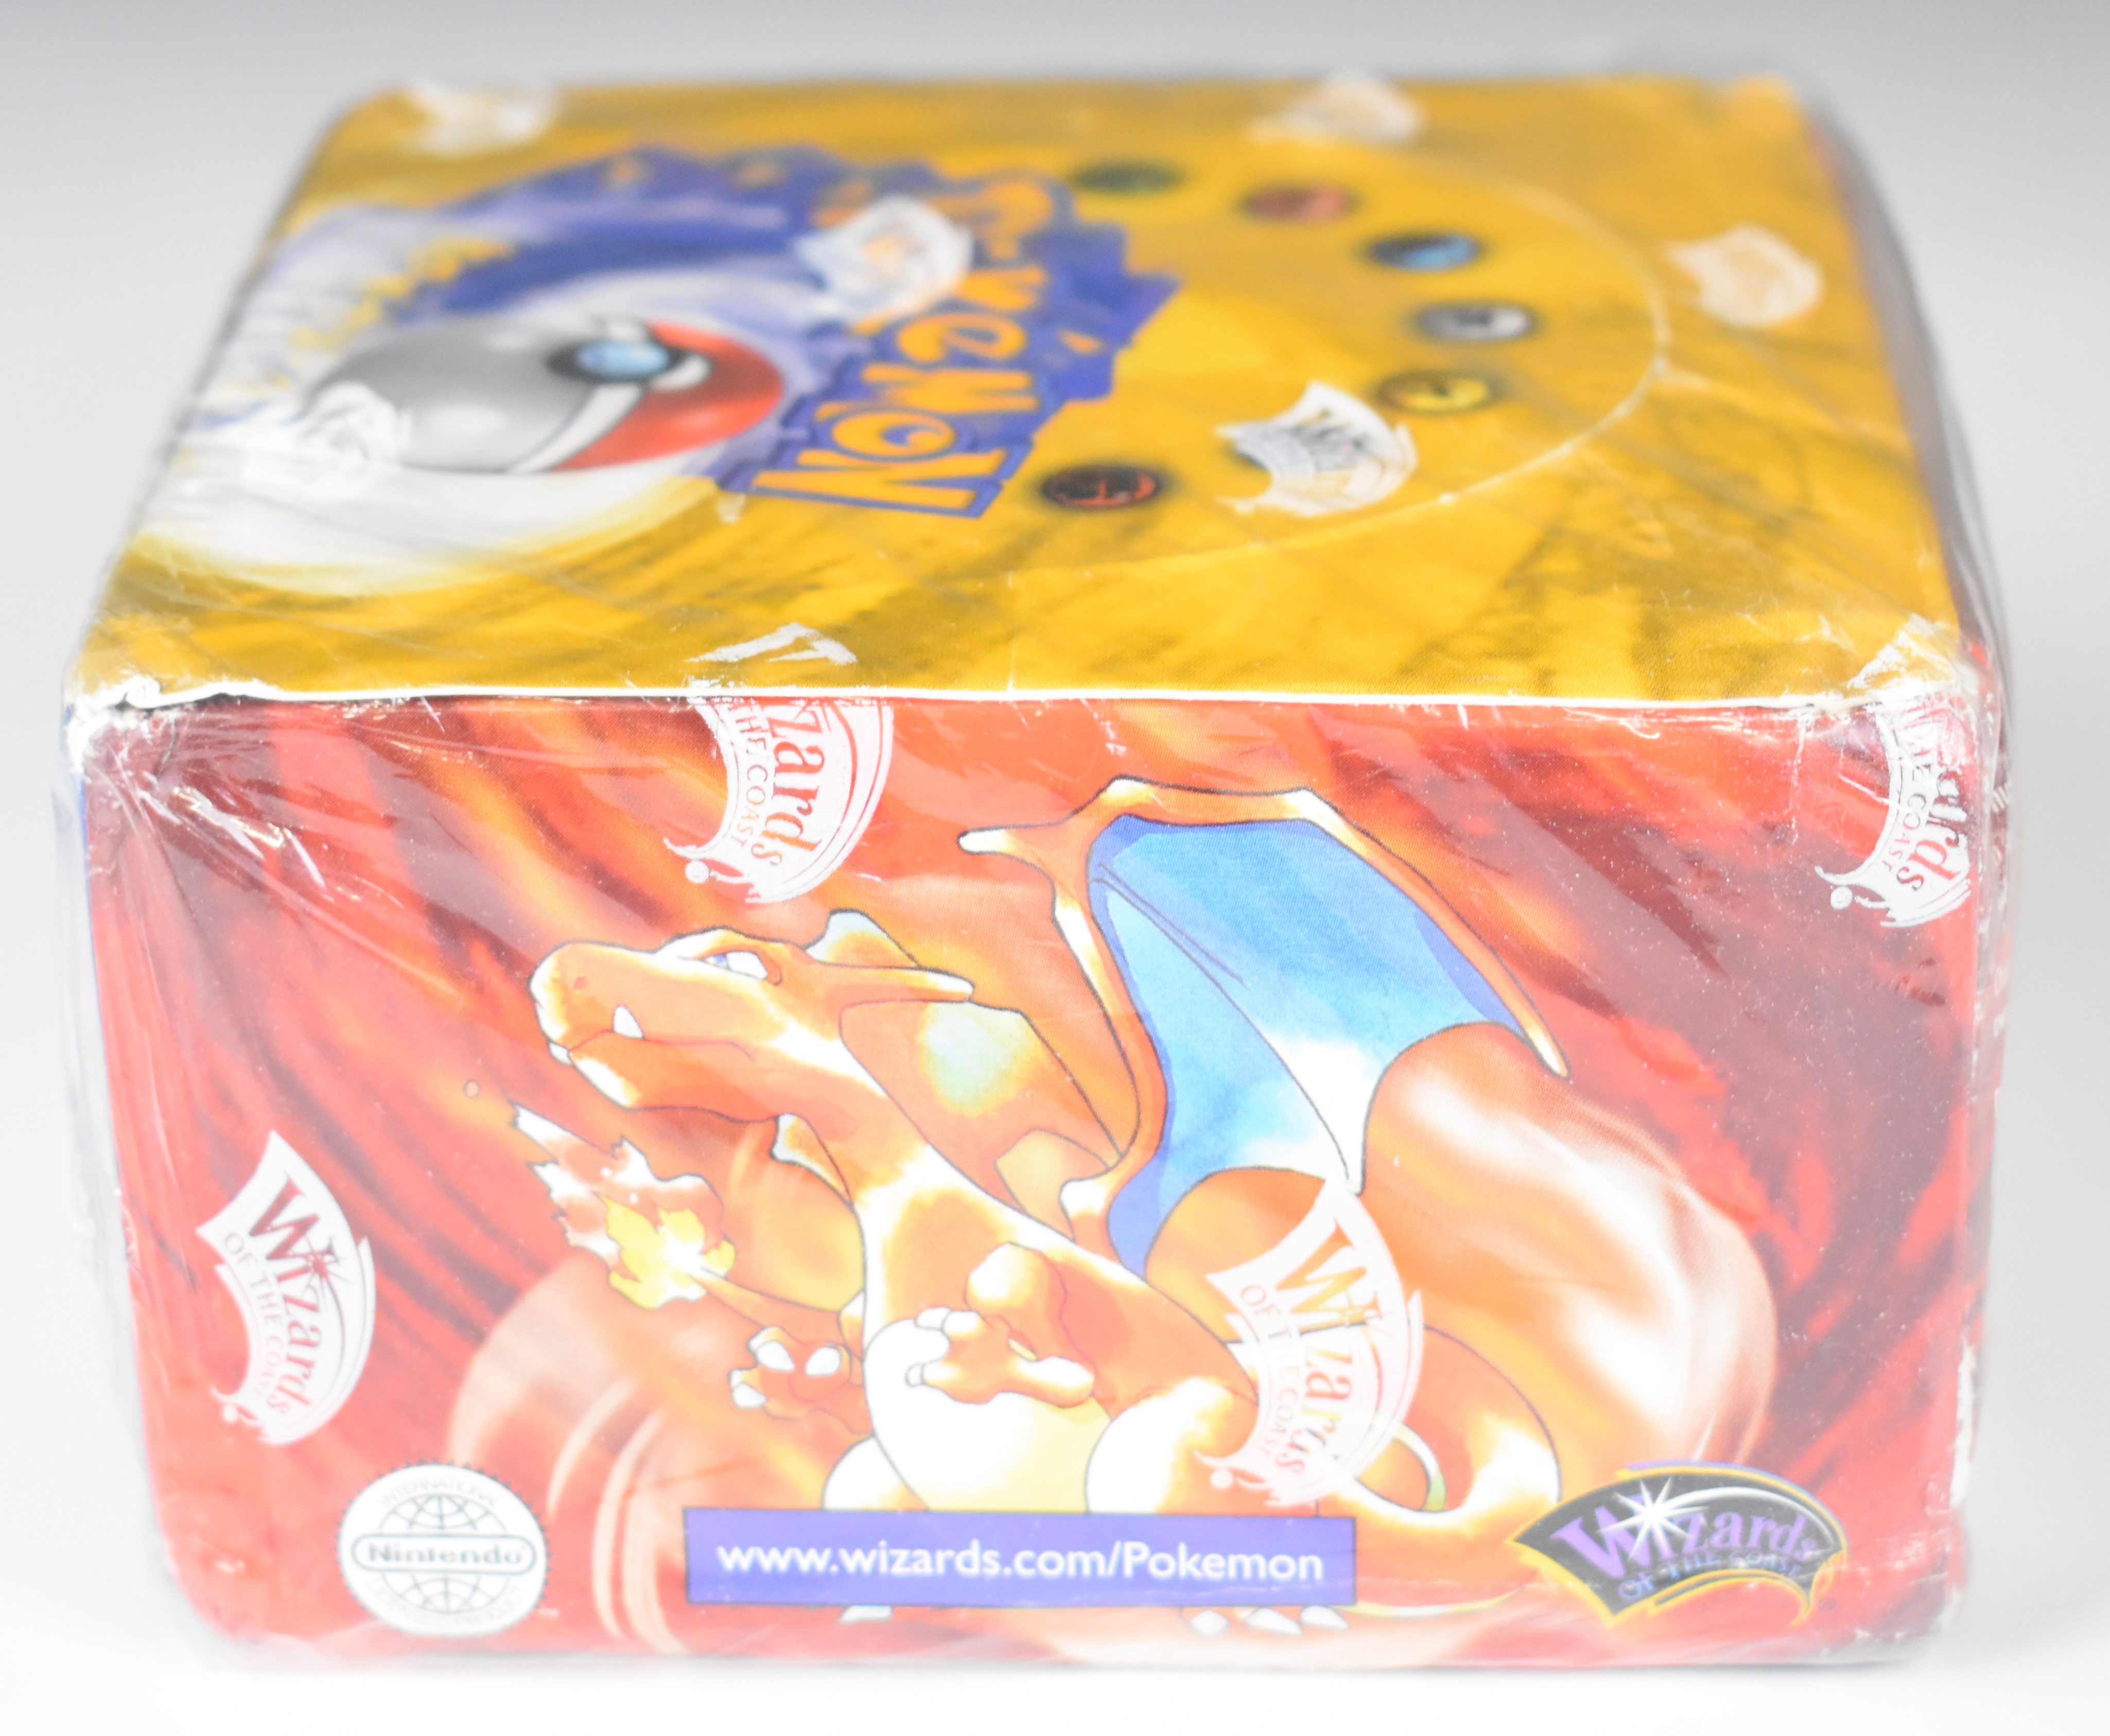 Pokémon TCG Base Set Booster Box, 4th edition by Wizards of the Coast (1999-2000), with made in UK - Image 4 of 9